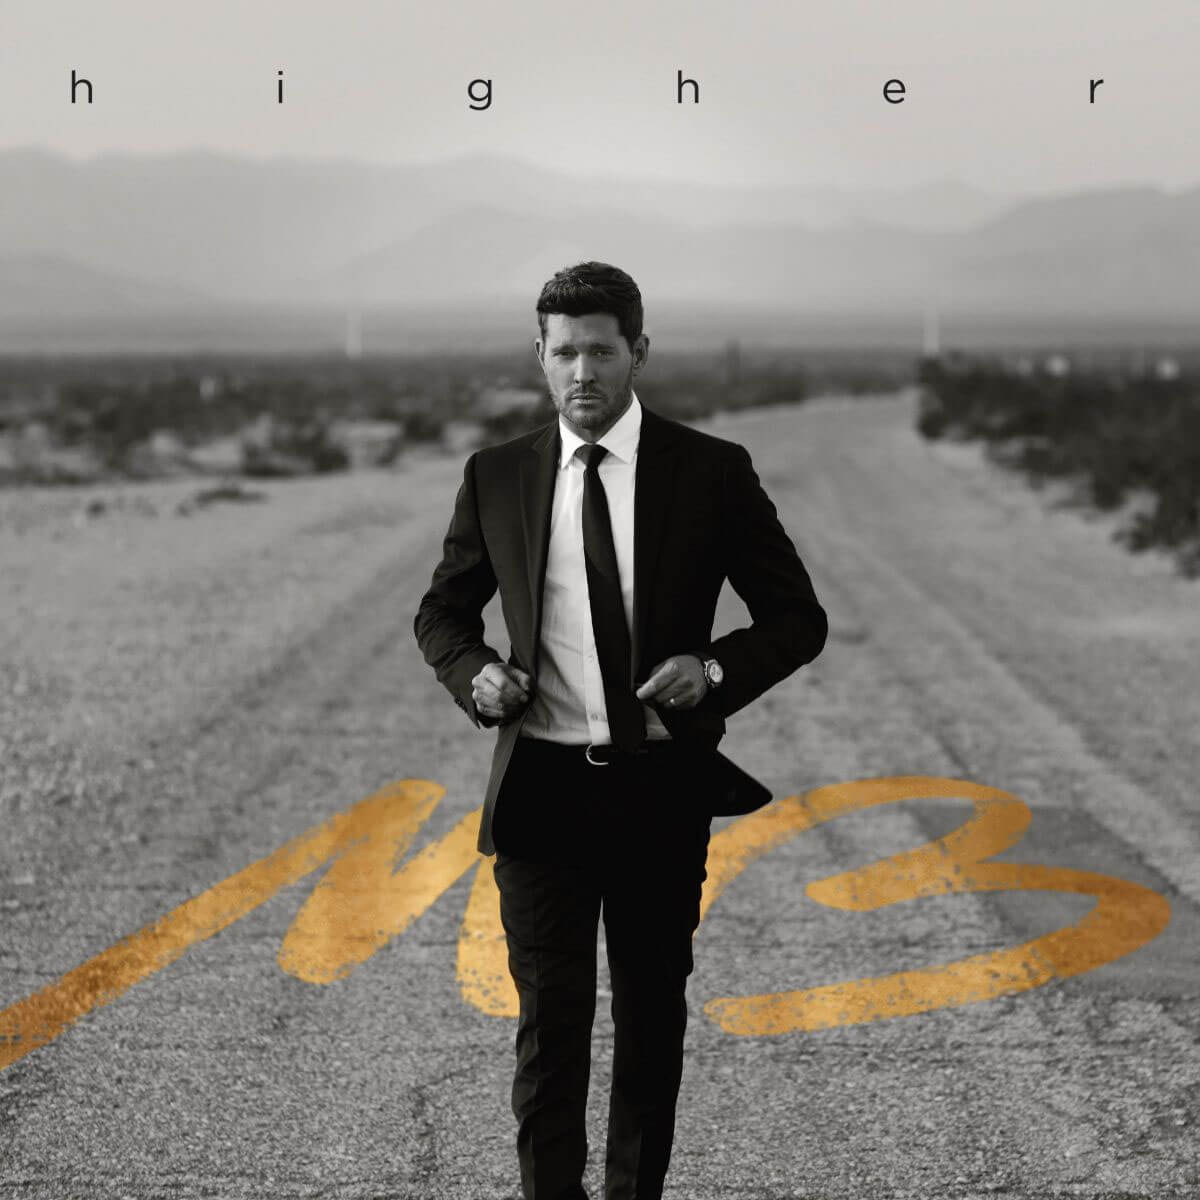 Michael Bublé New Single ‘I’ll Never Not Love you” Out Now.